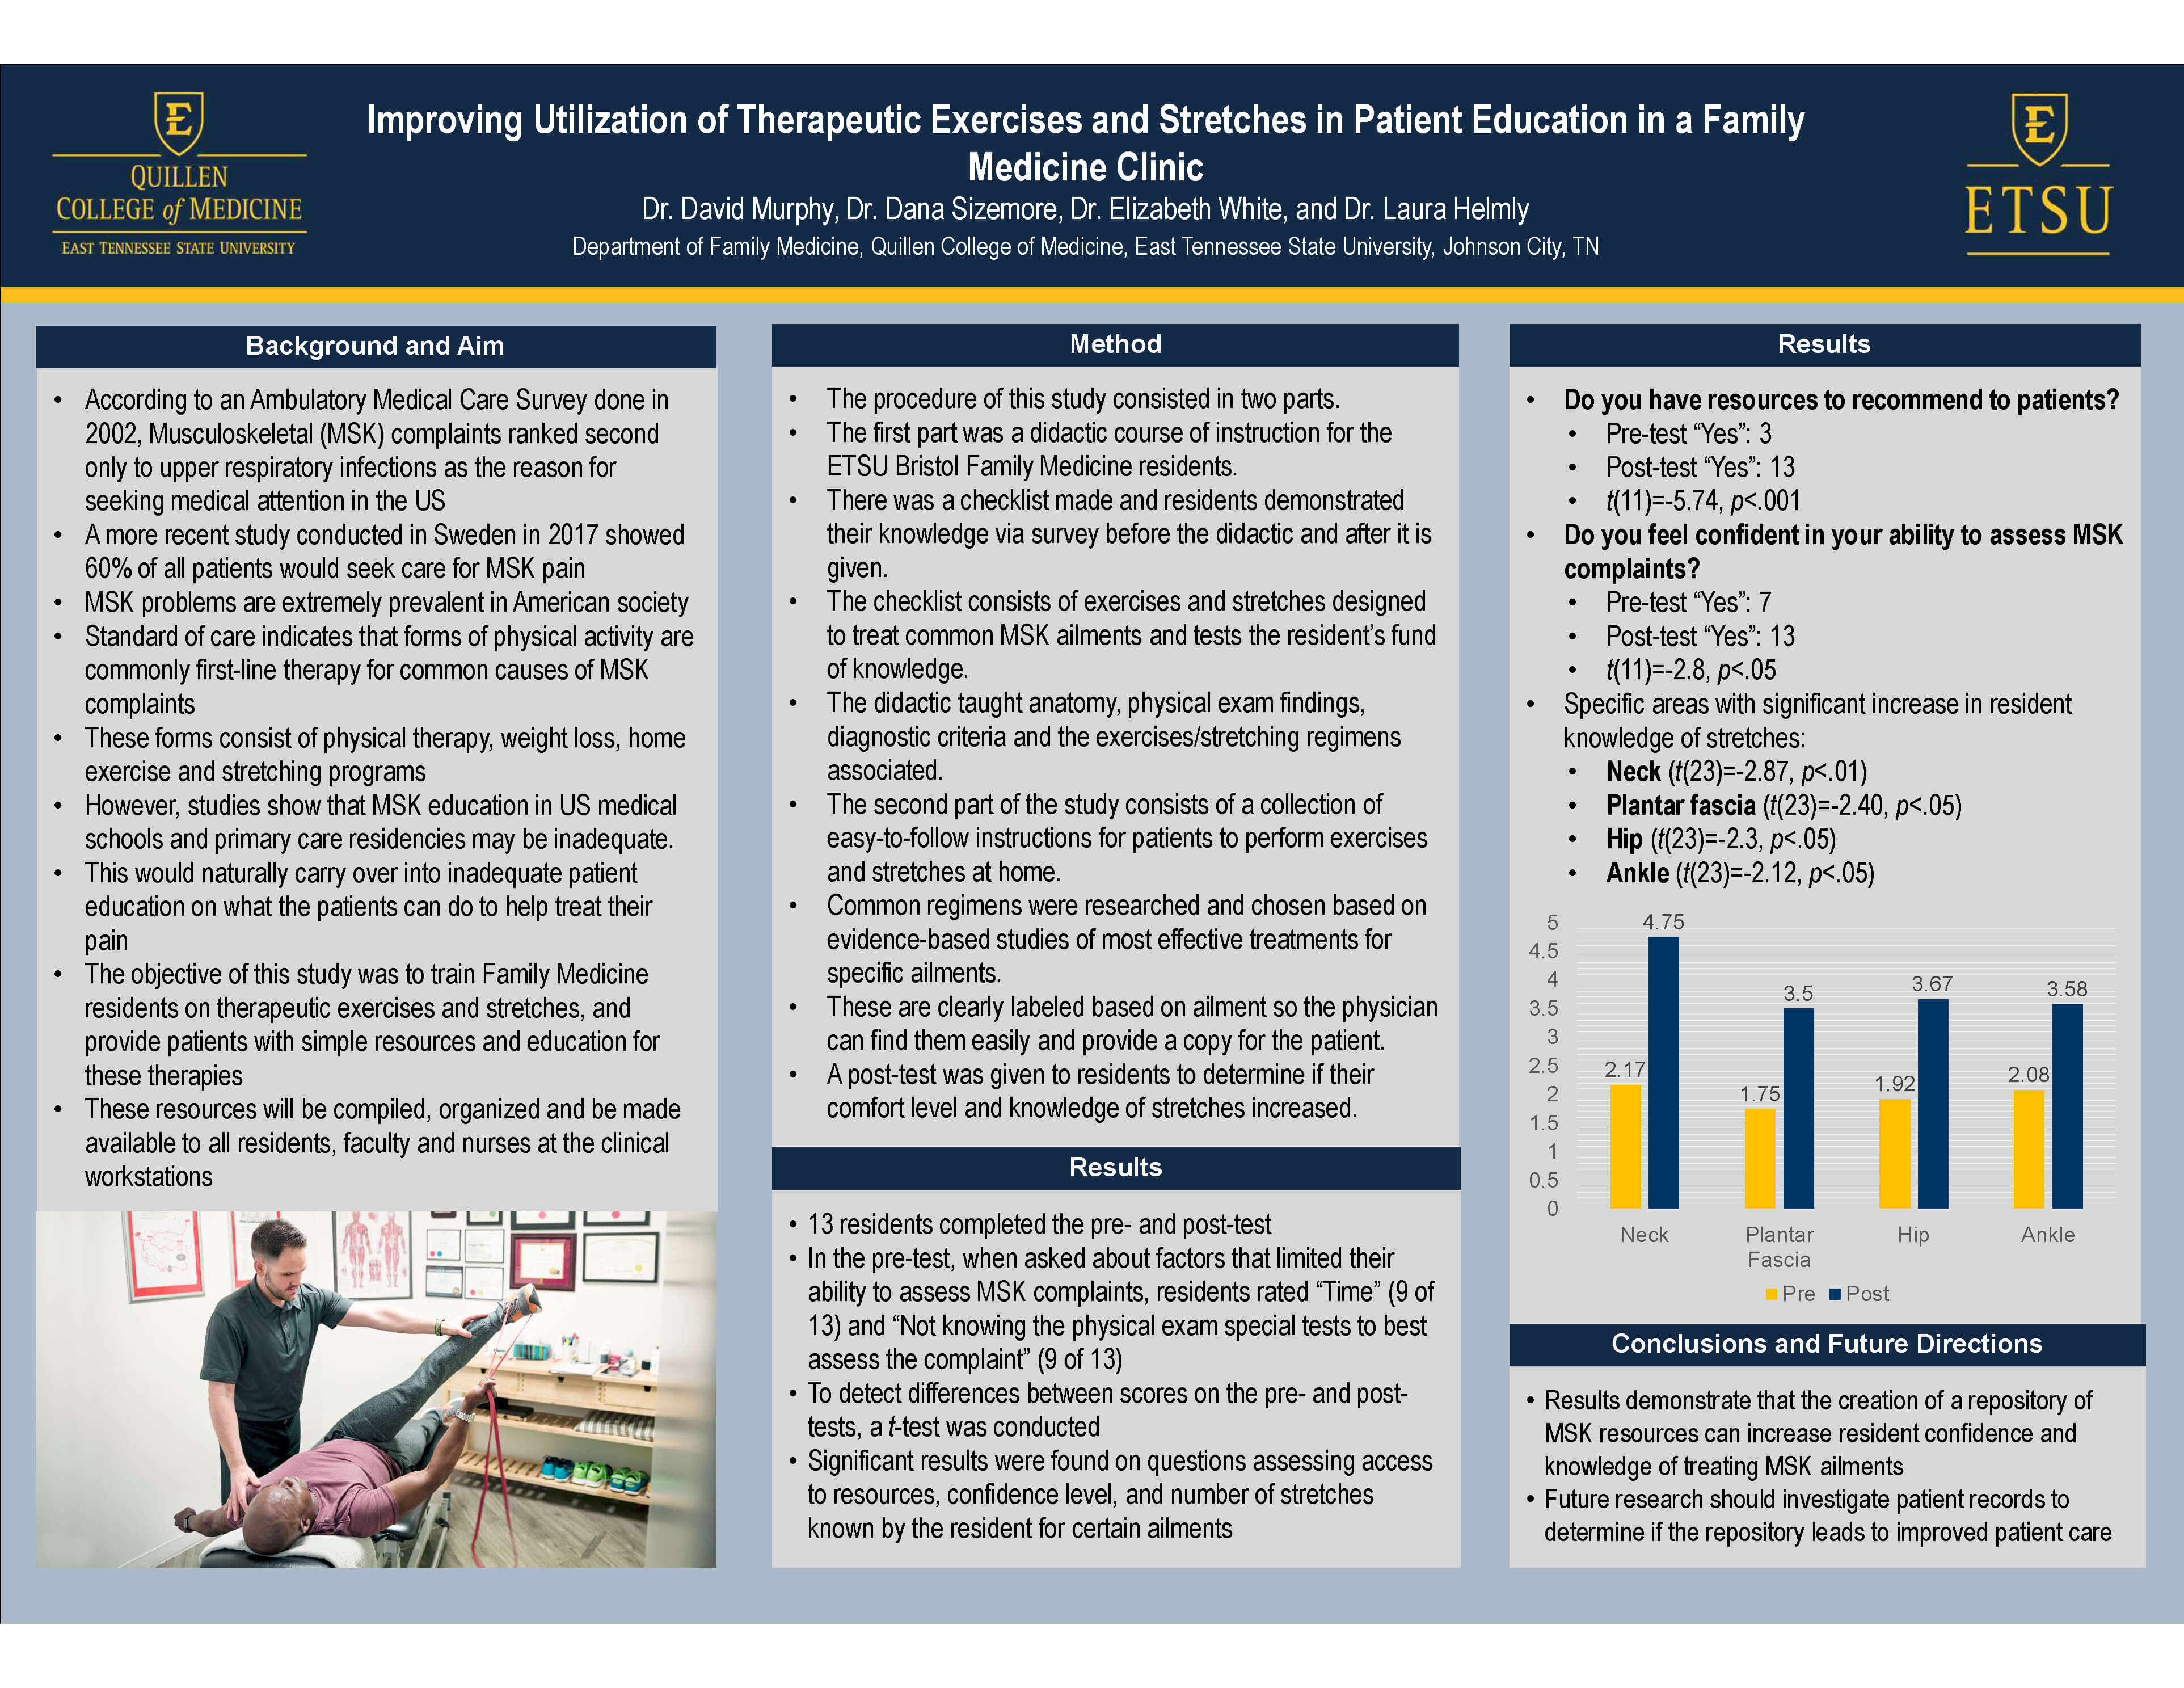 Improving Utilization of Therapeutic Exercises and Stretches in Patient Education in a Family